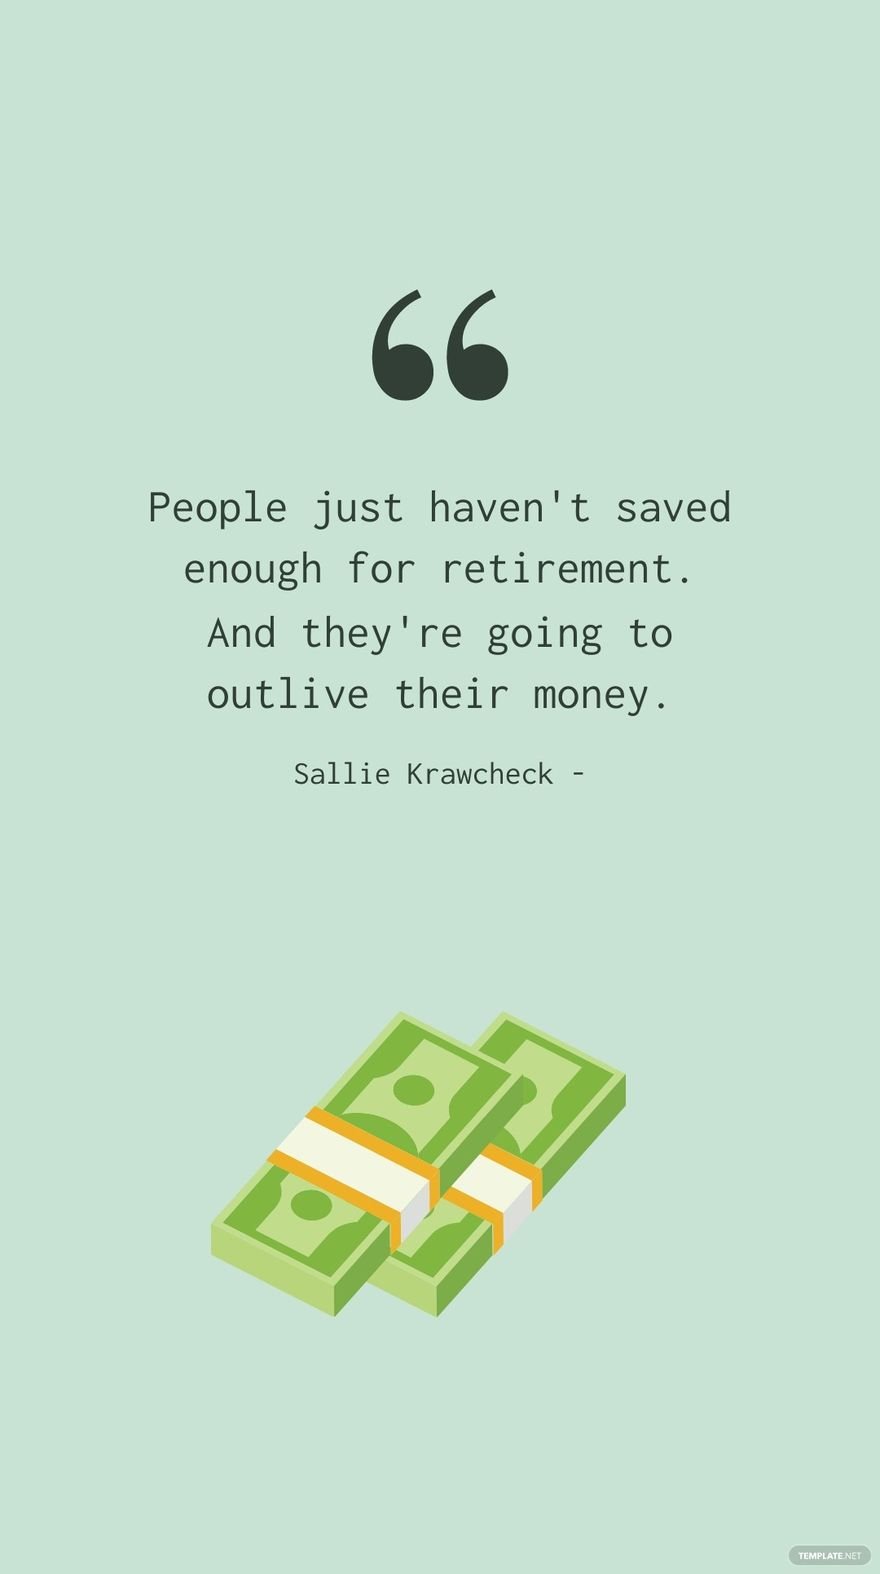 Free Sallie Krawcheck - People just haven't saved enough for retirement. And they're going to outlive their money. in JPG